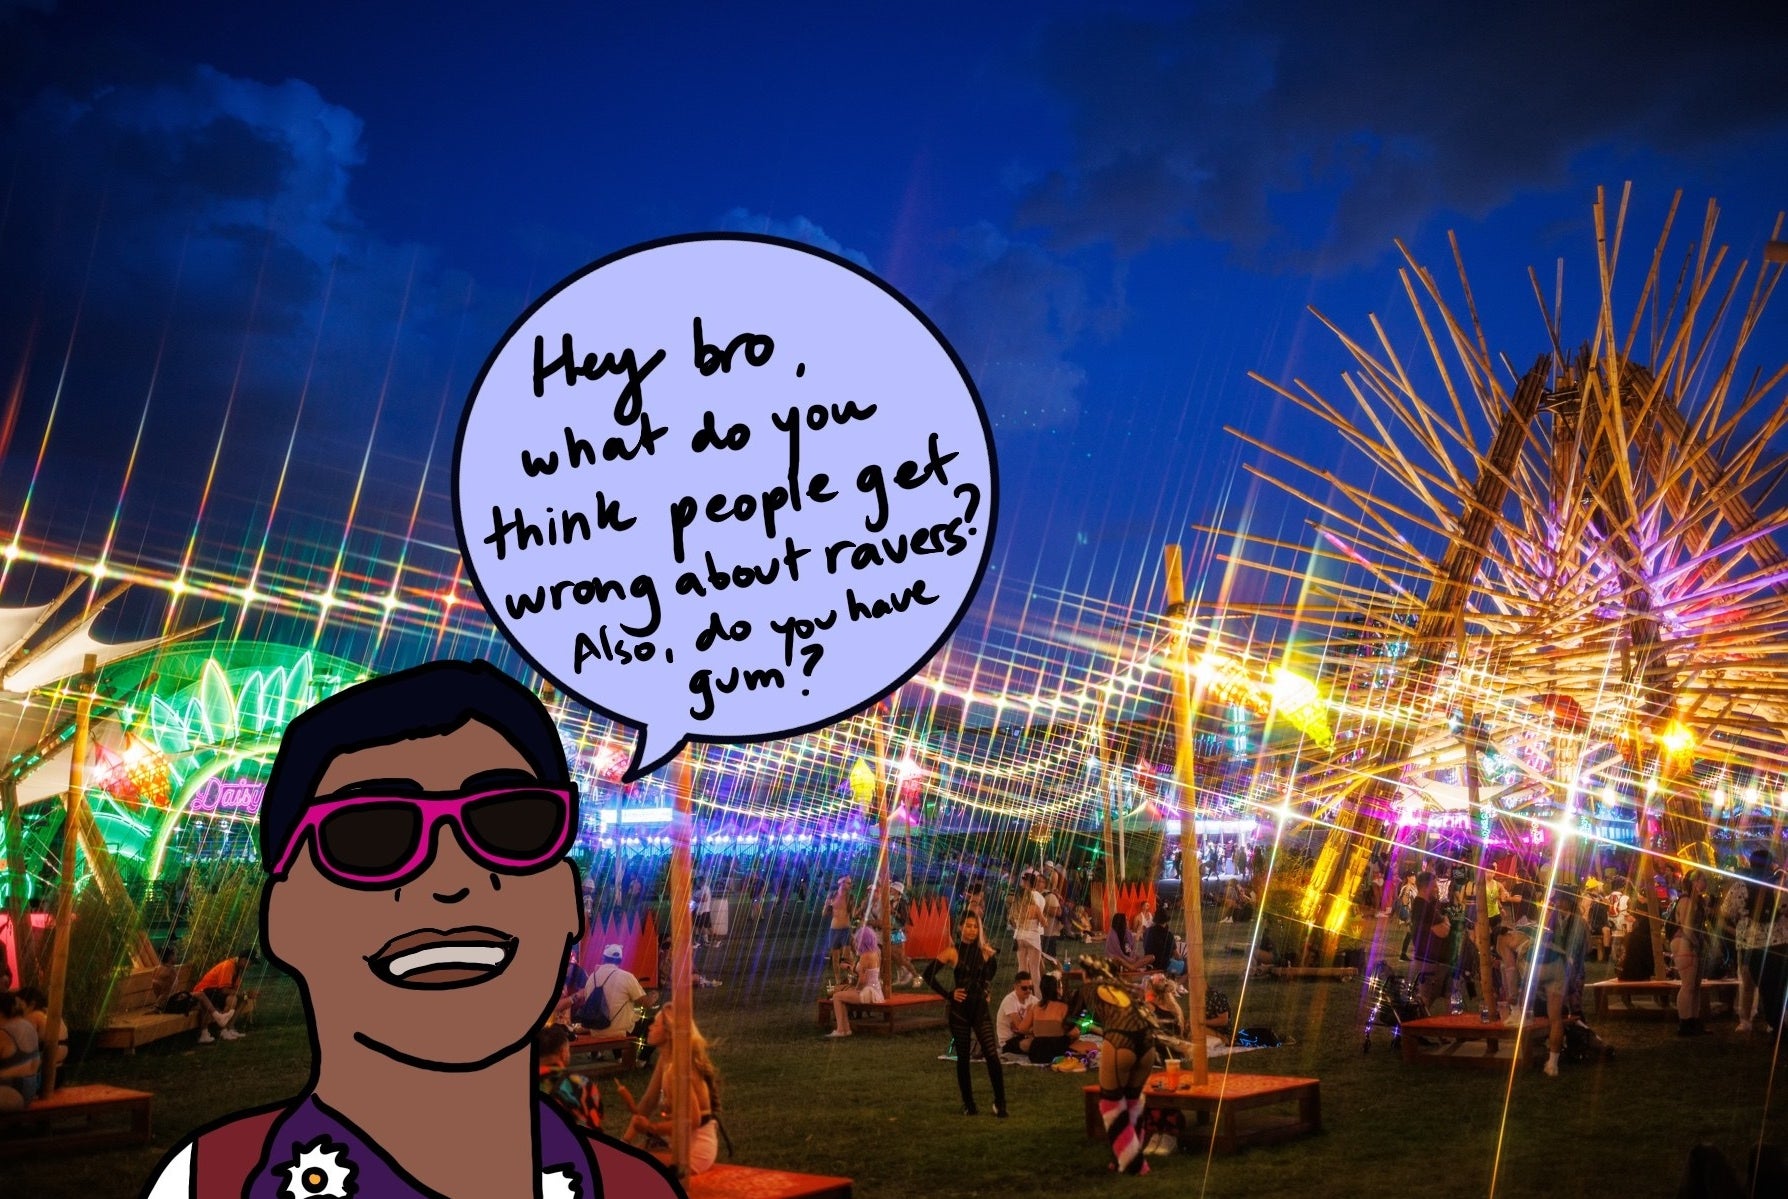 author wearing sunglasses in front of a lit-up seating area asking fellow attendees what people get wrong about ravers